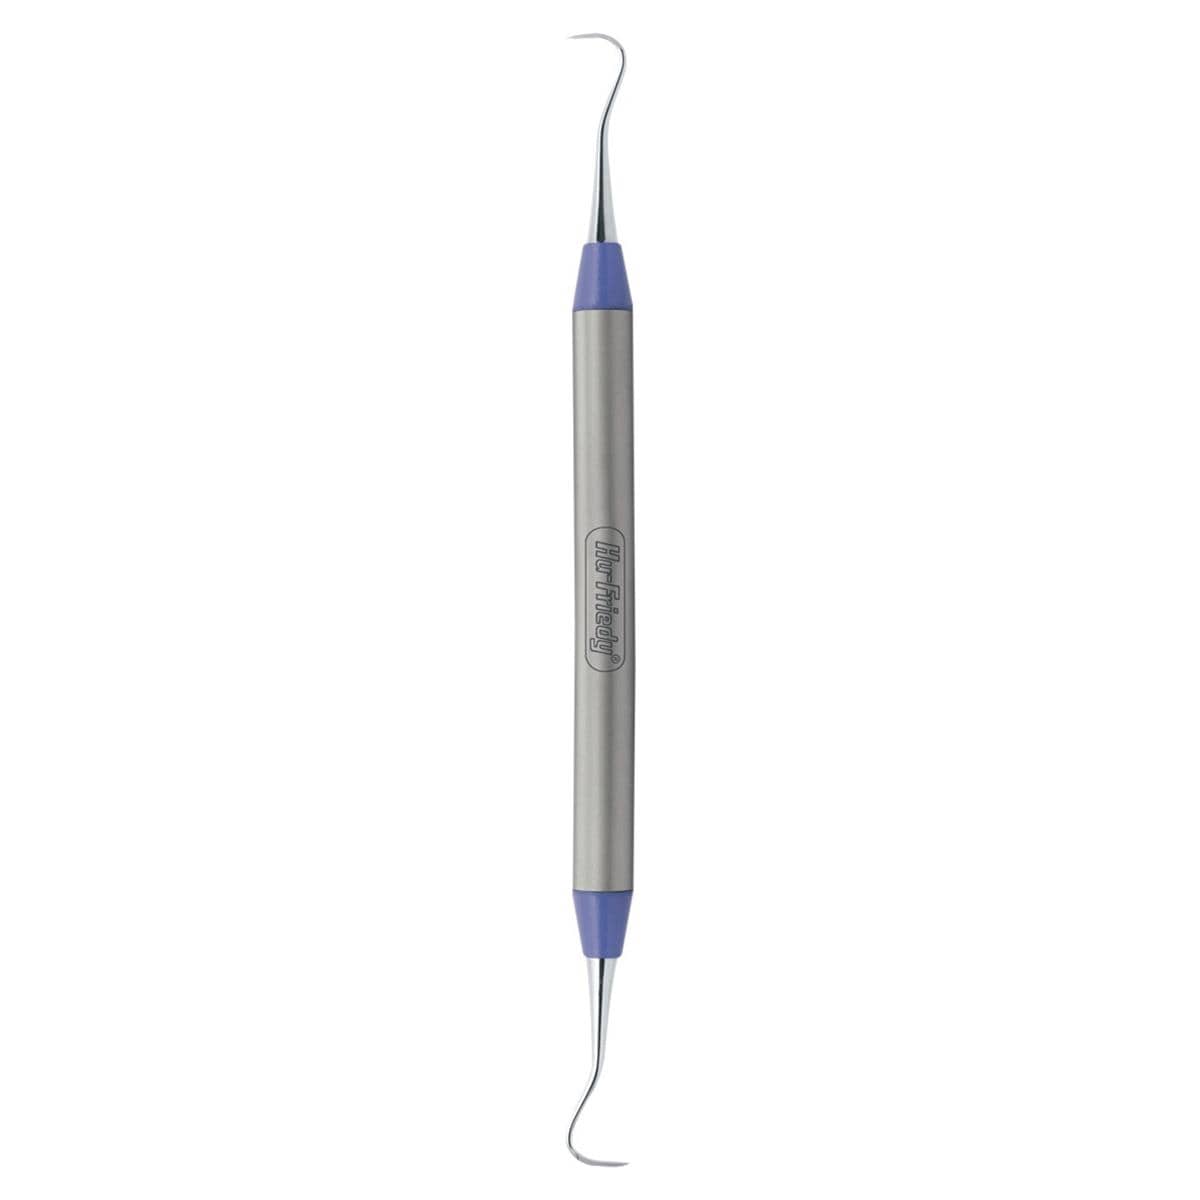 Scaler - EverEdge 2.0, Color Cones smooth handle - Anterior Hygienist H6/7, SH6/7CCHE2